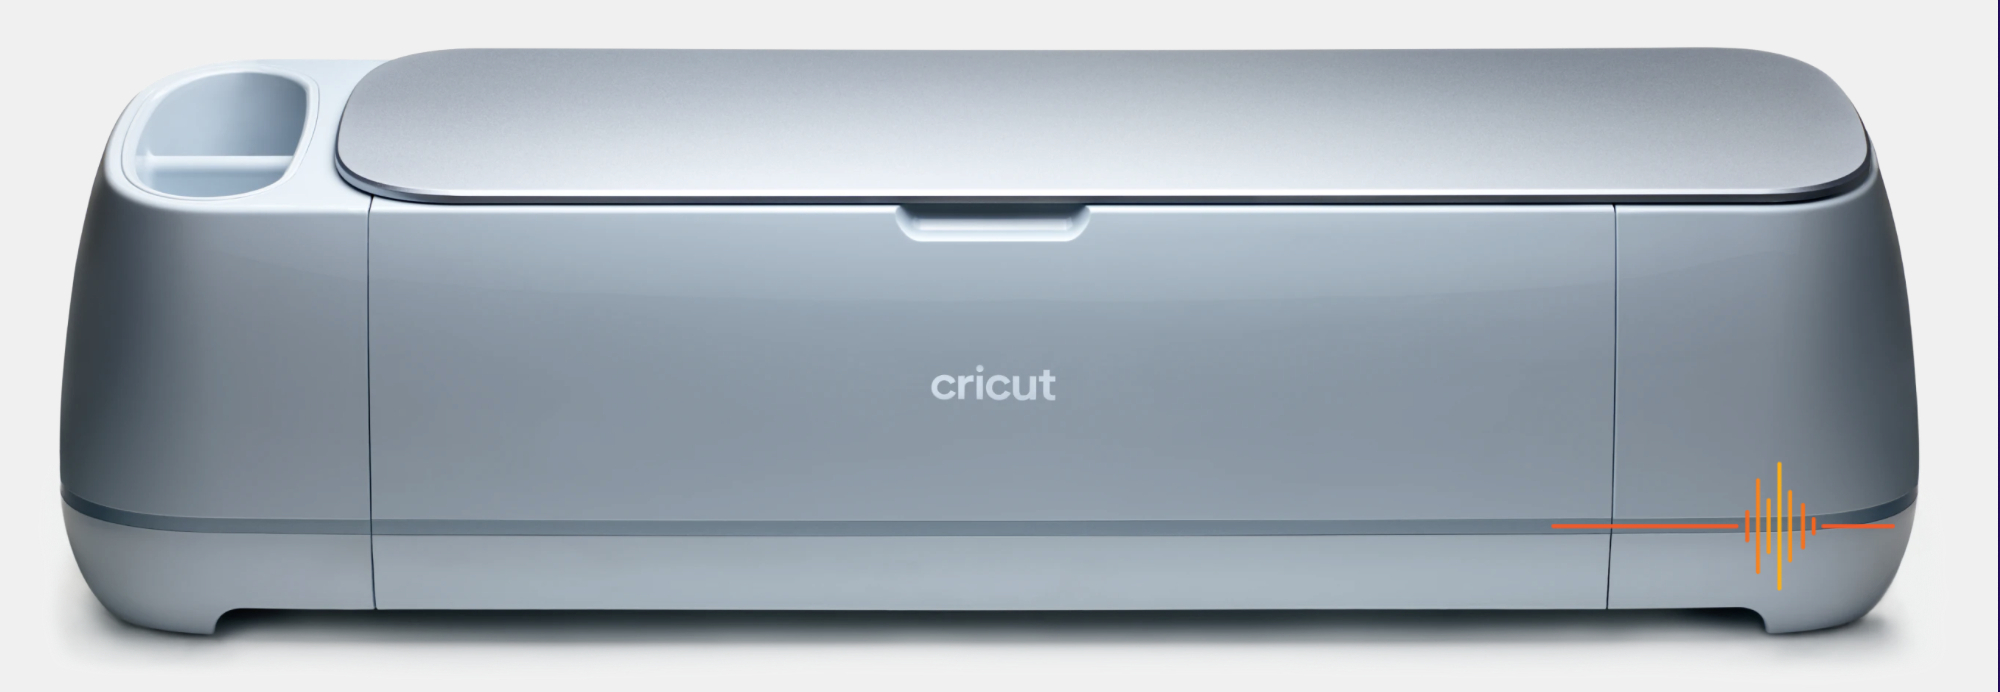 Cricut: 11 Books In 1: The Best Cricut Explore Air 2 Guide. Discover All  The Accessories, The 300+ Materials, And Numerous Tip (Paperback)